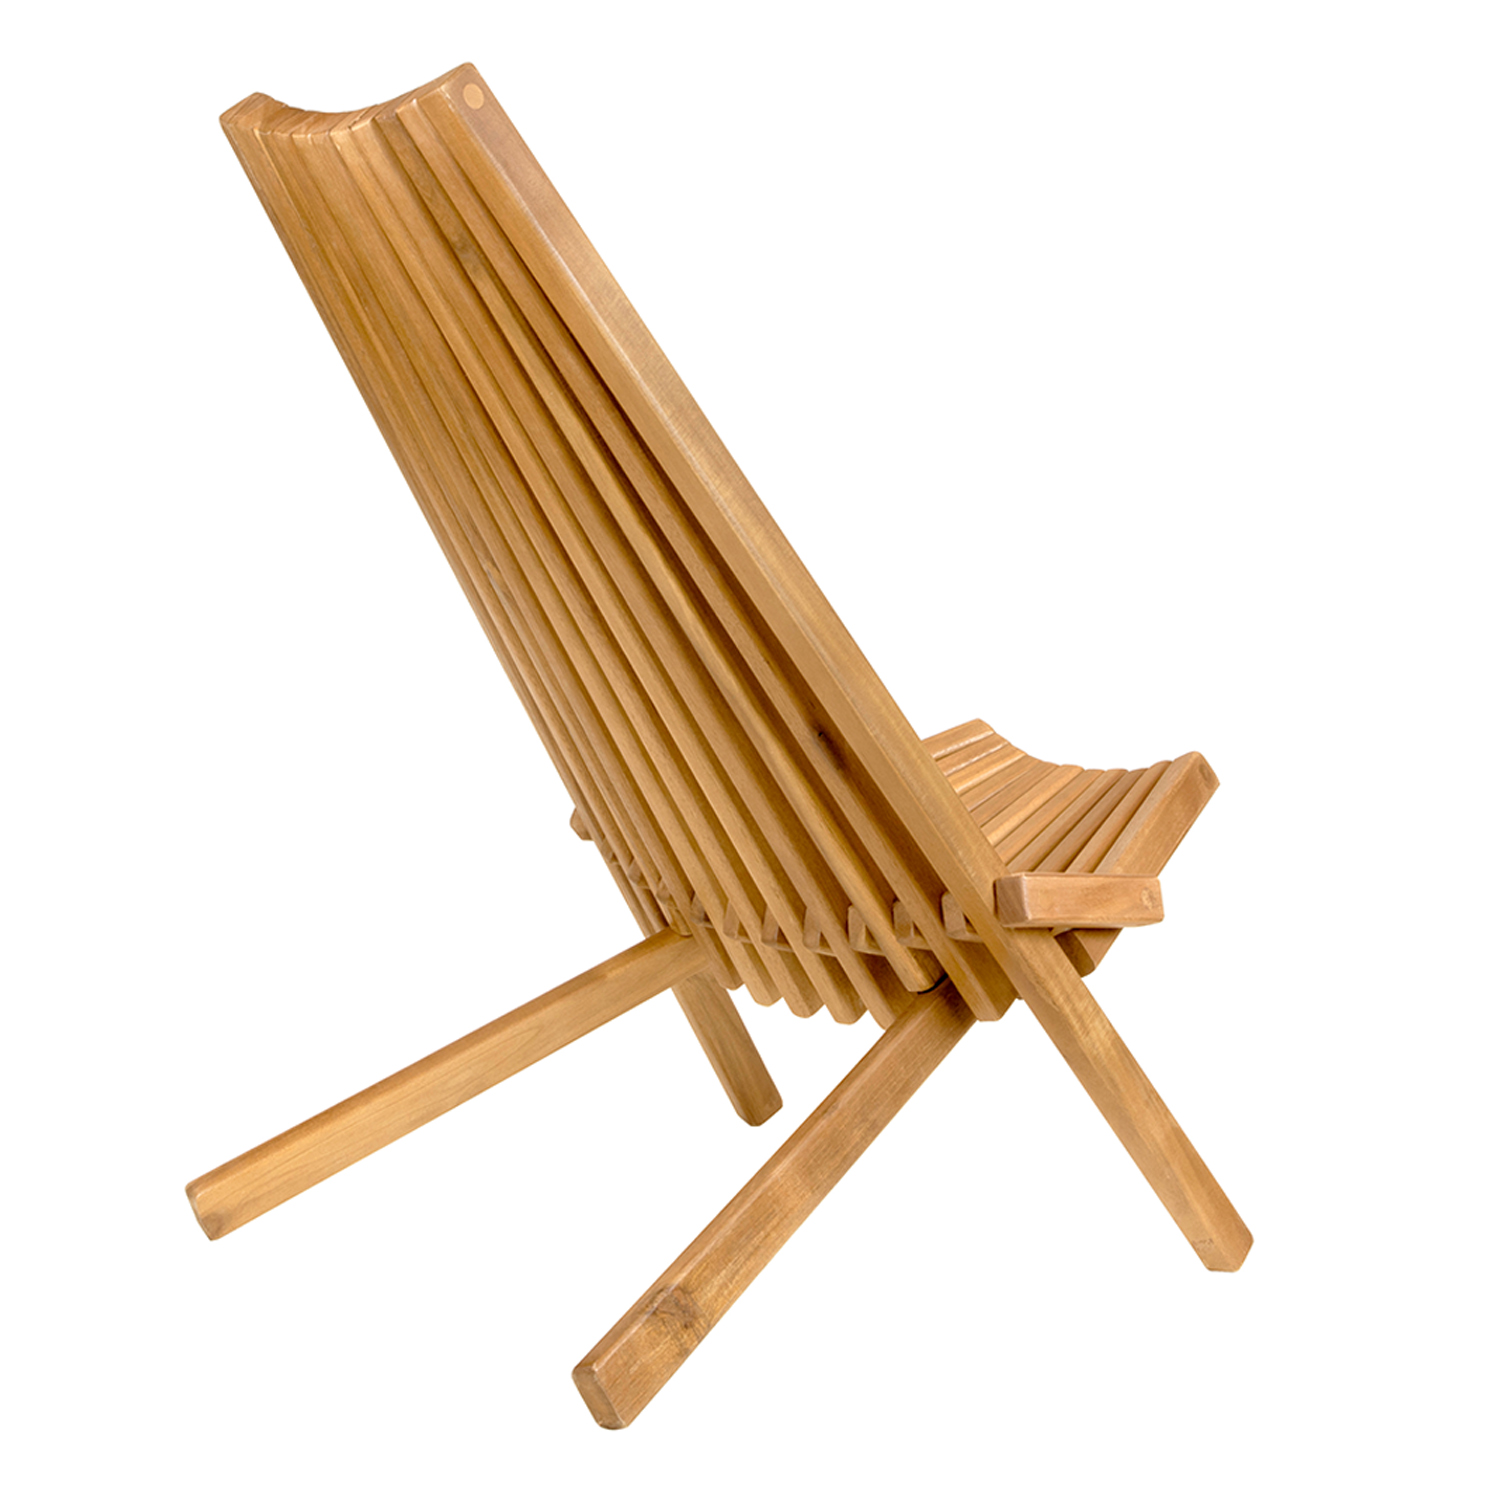 CleverMade Tamarack Low Profile Acacia Wood Lounge Folding Wooden Outdoor Chair